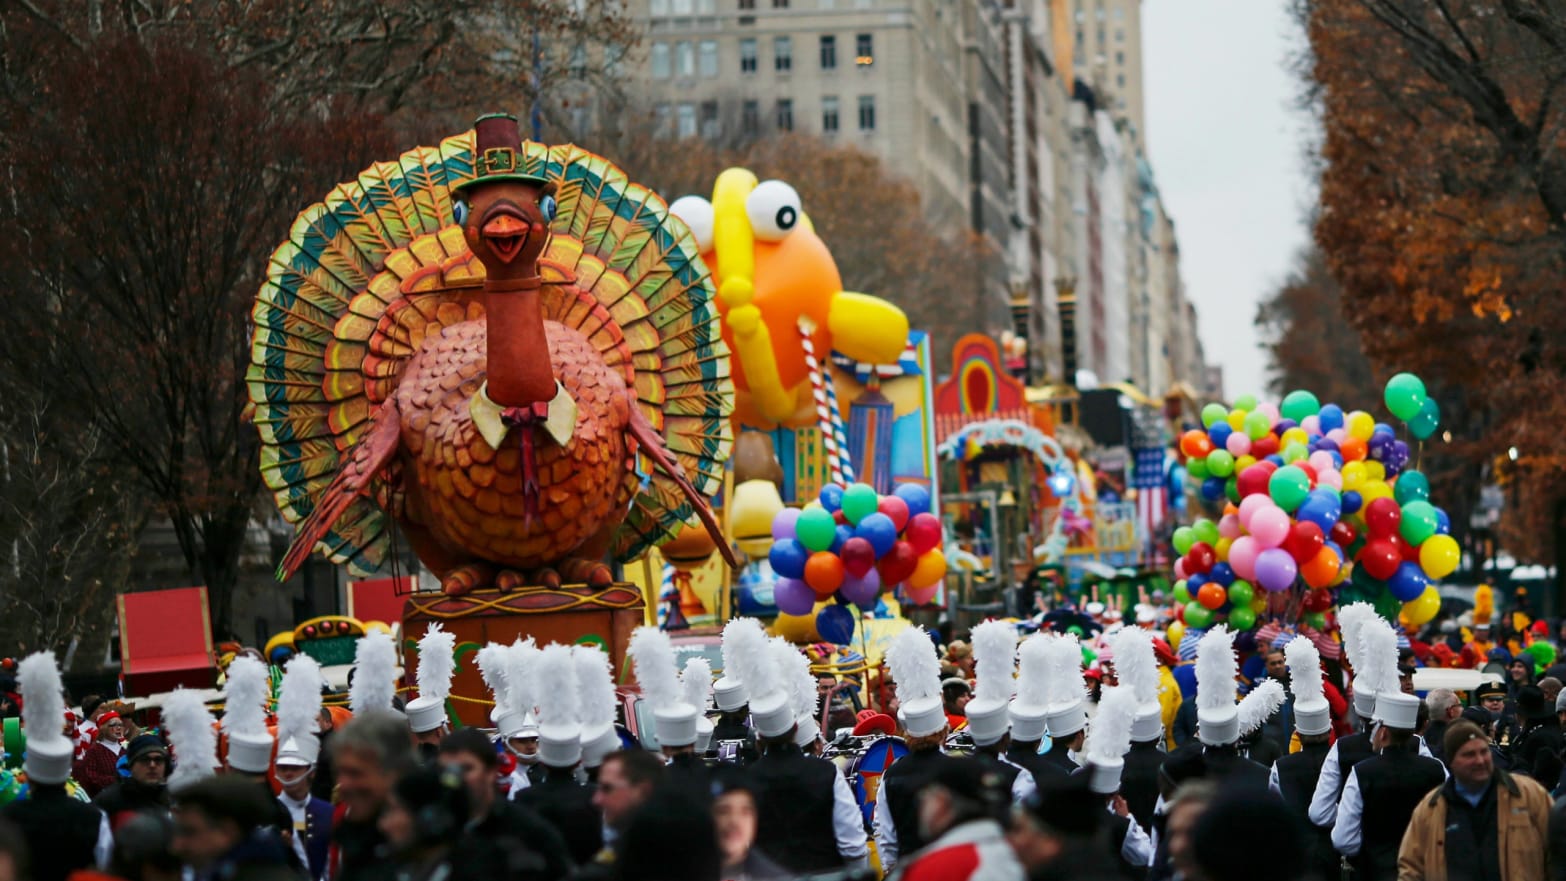 How to Watch 2015 Macy’s Thanksgiving Day Parade Live Stream Online - Stream Thanksgiving Day Parade 2015